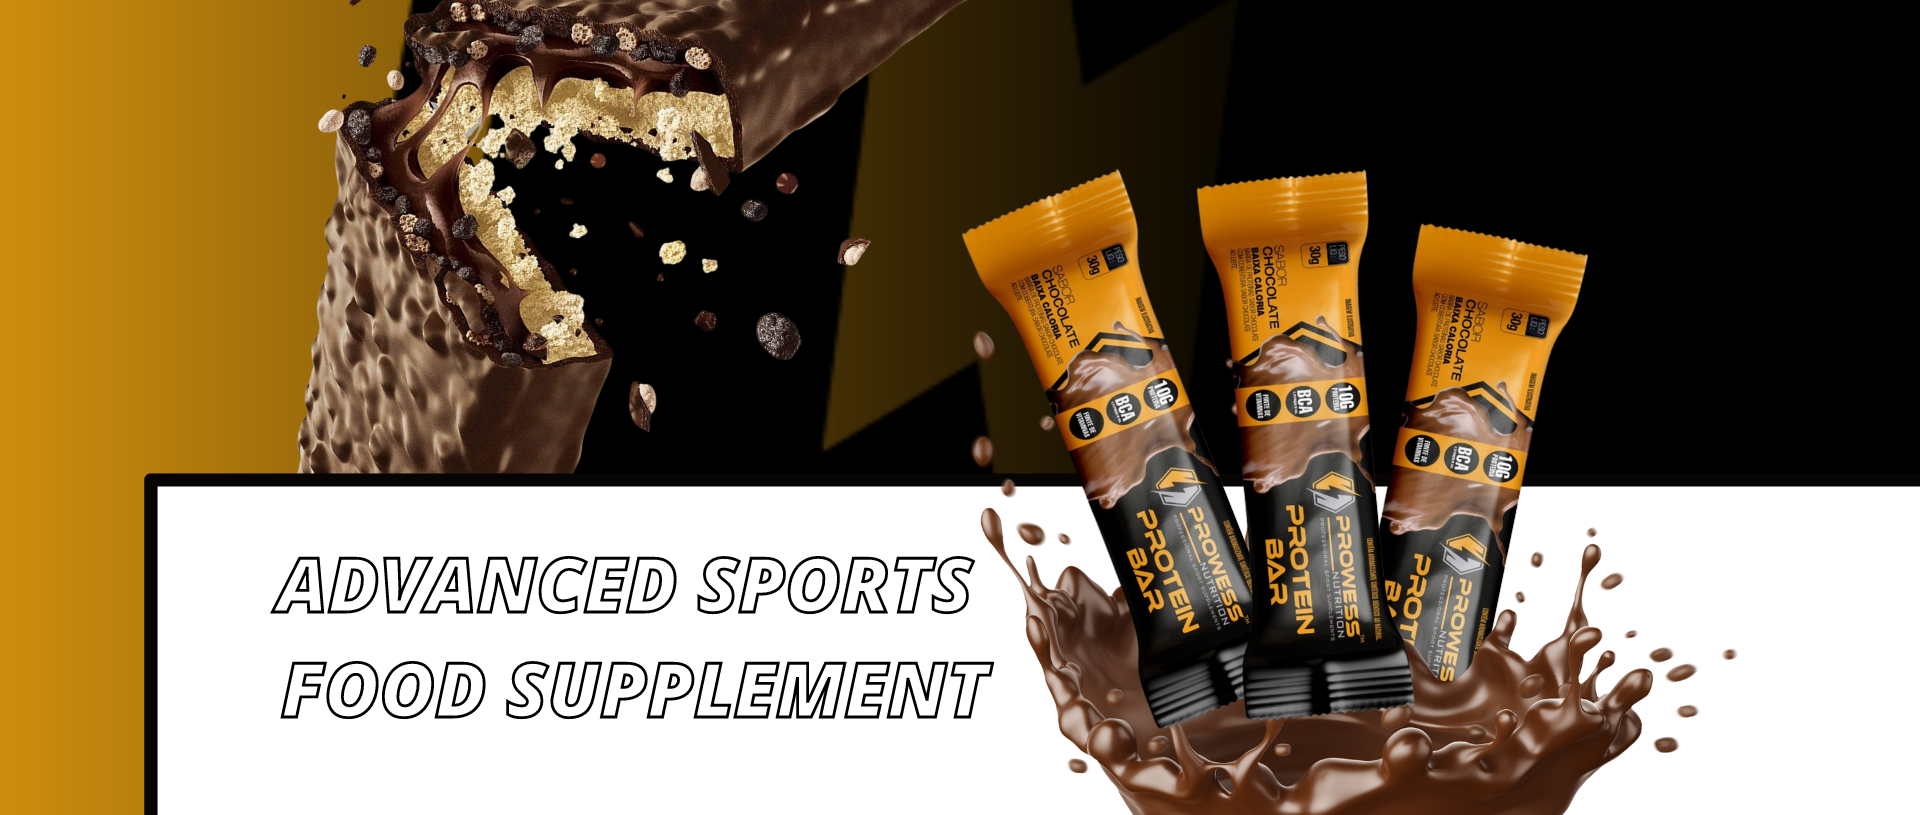 ADVANCED SPORTS FOOD SUPPLEMENT (1920 × 815 px)